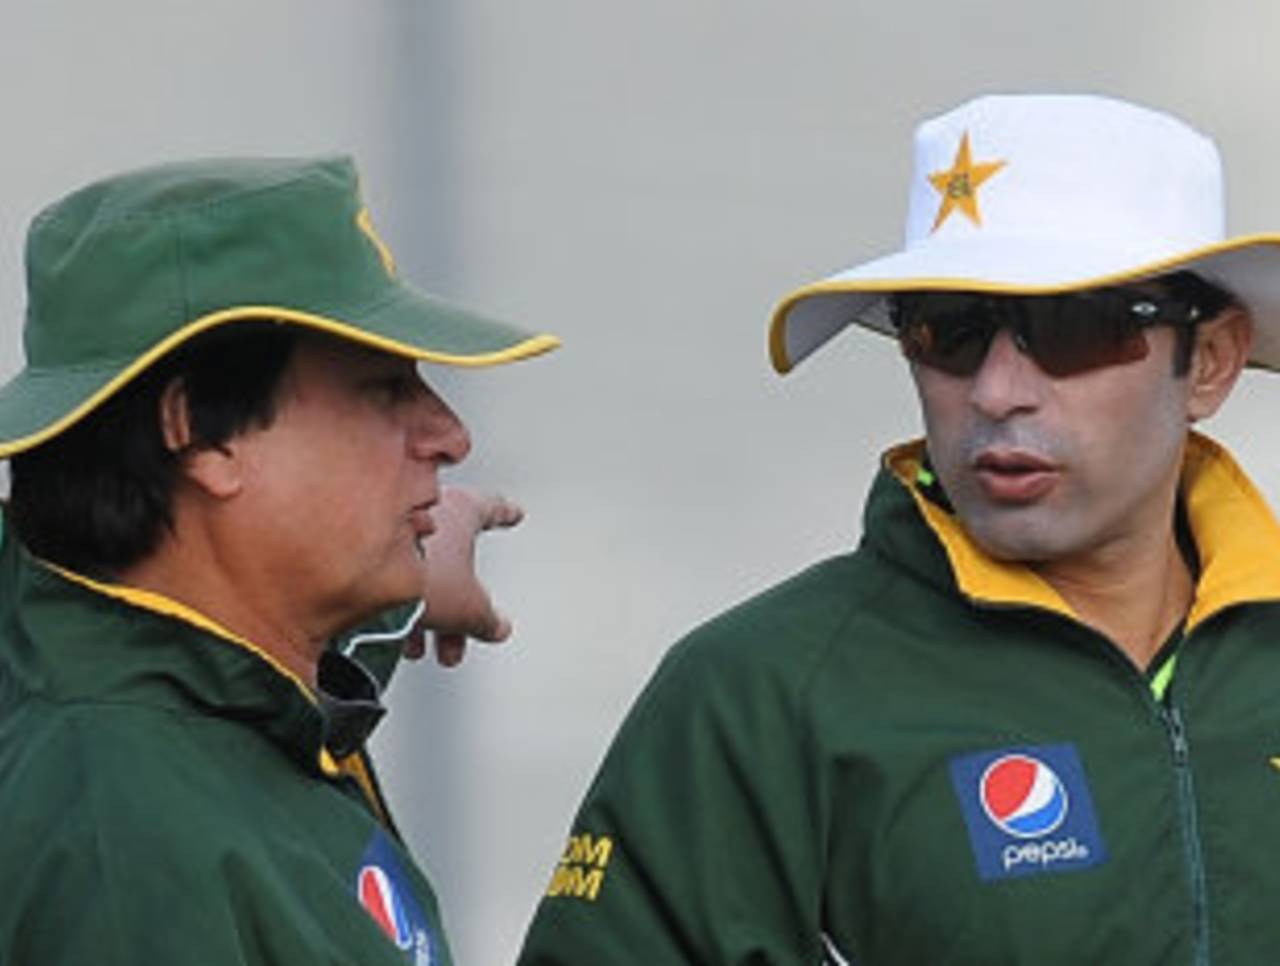 Mohsin Khan has a chat with Misbah-ul-Haq during a training session, Dubai, January, 21, 2012